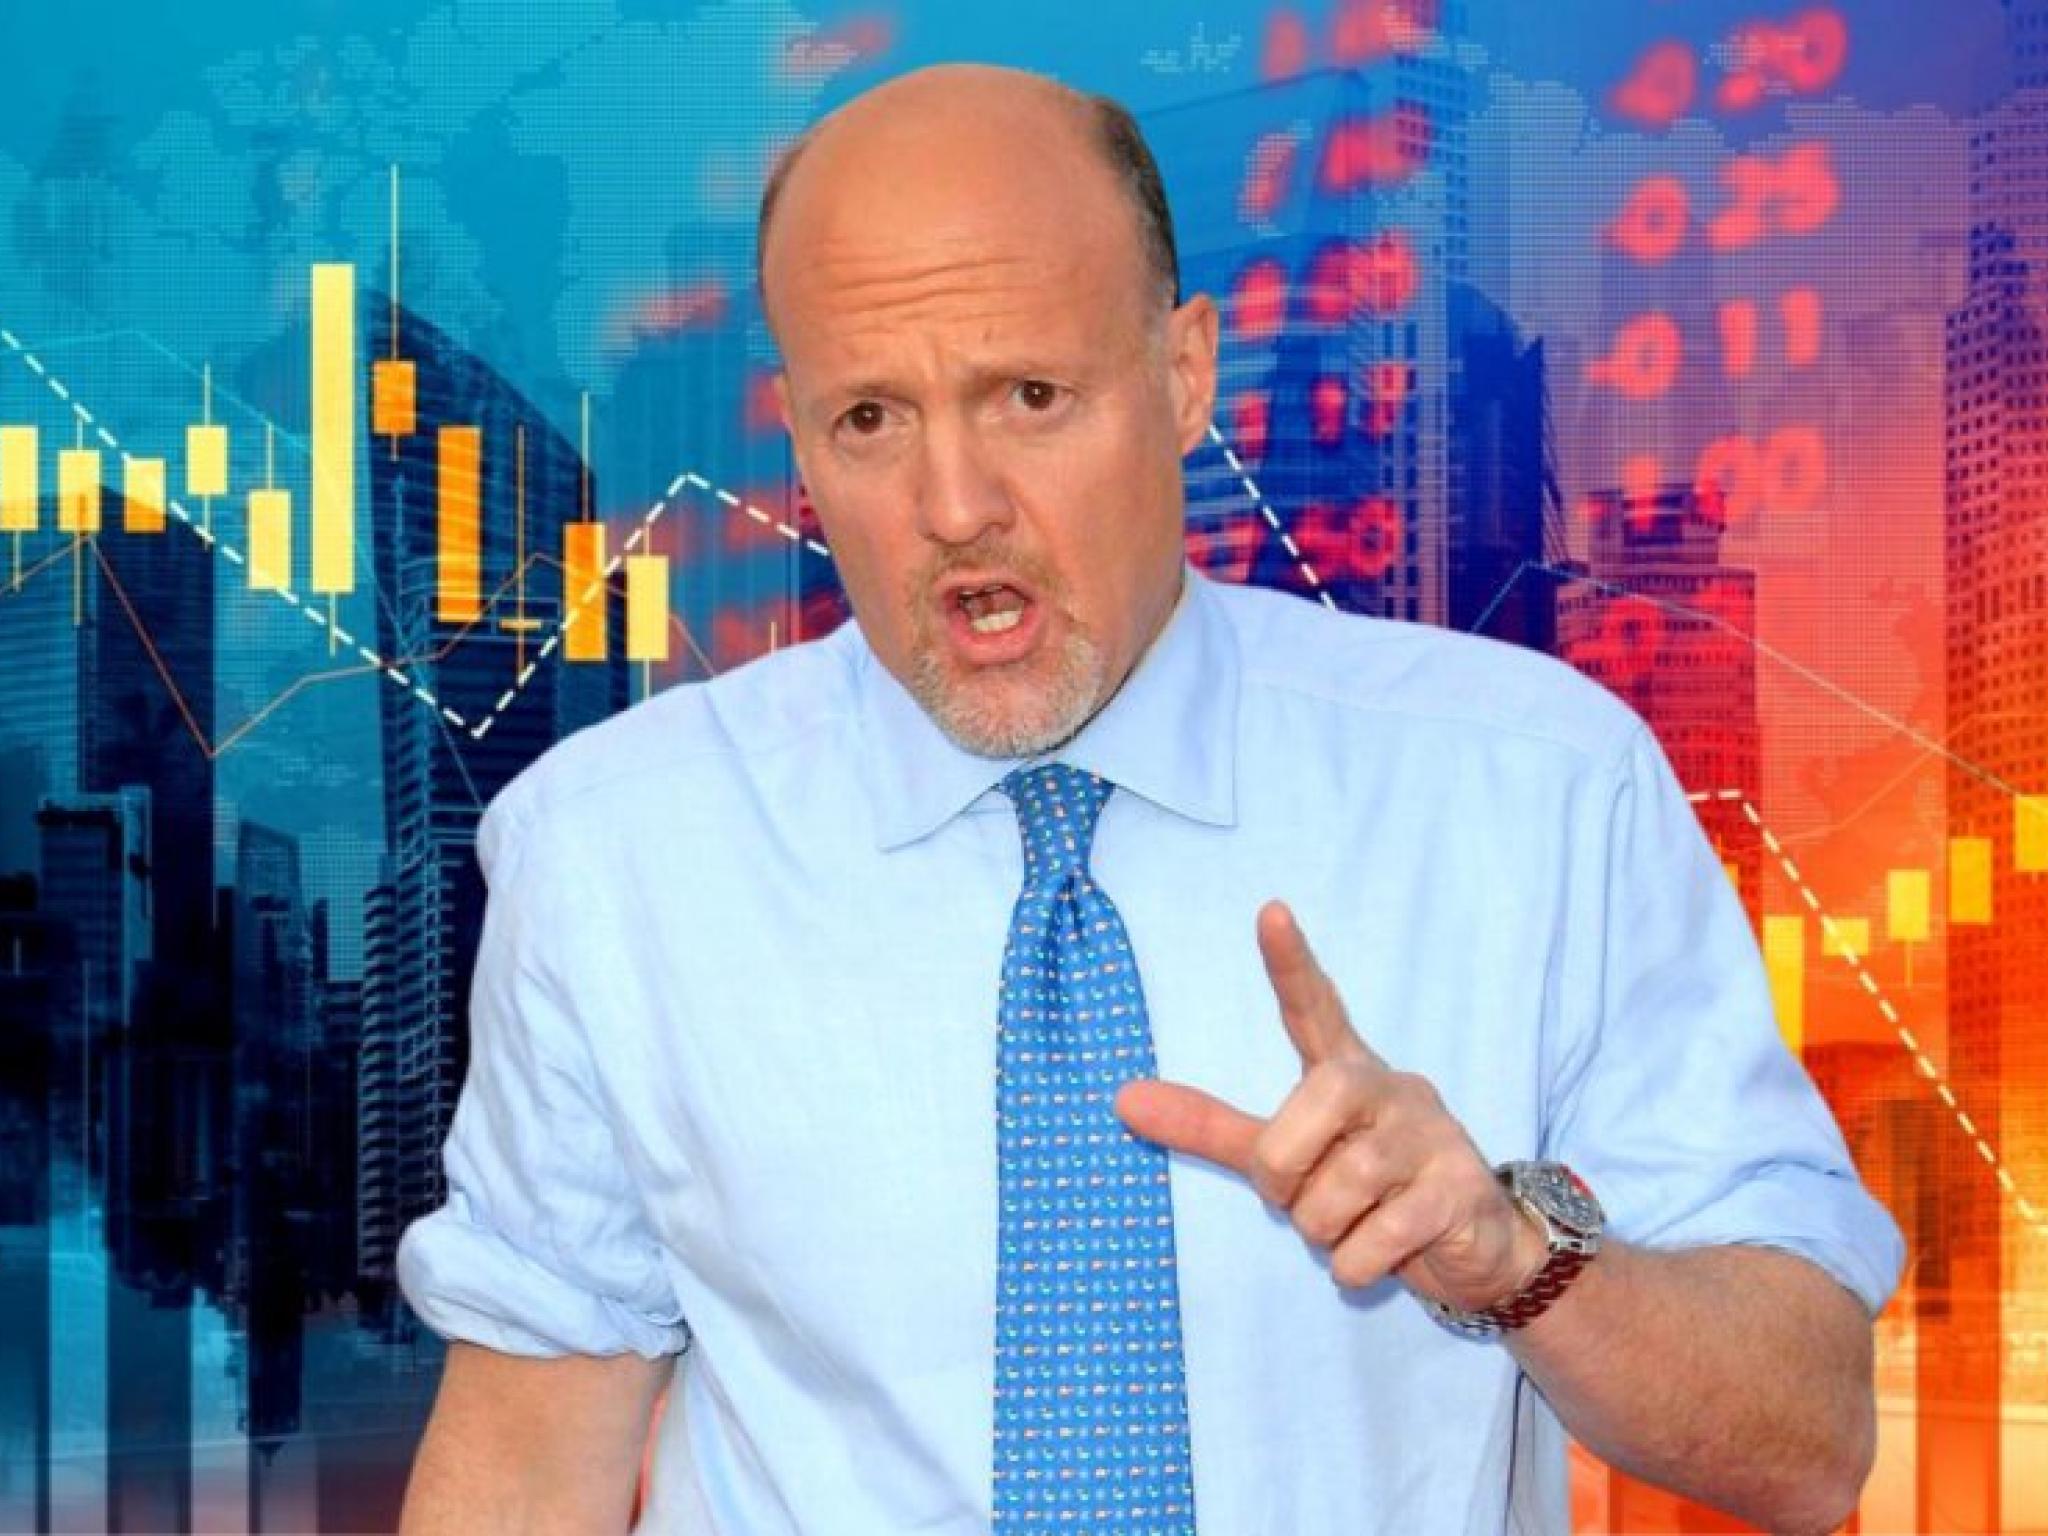  jim-cramer-has-a-market-strategy-interest-rates-up-buy-mag-7-rates-down-buy-everything 